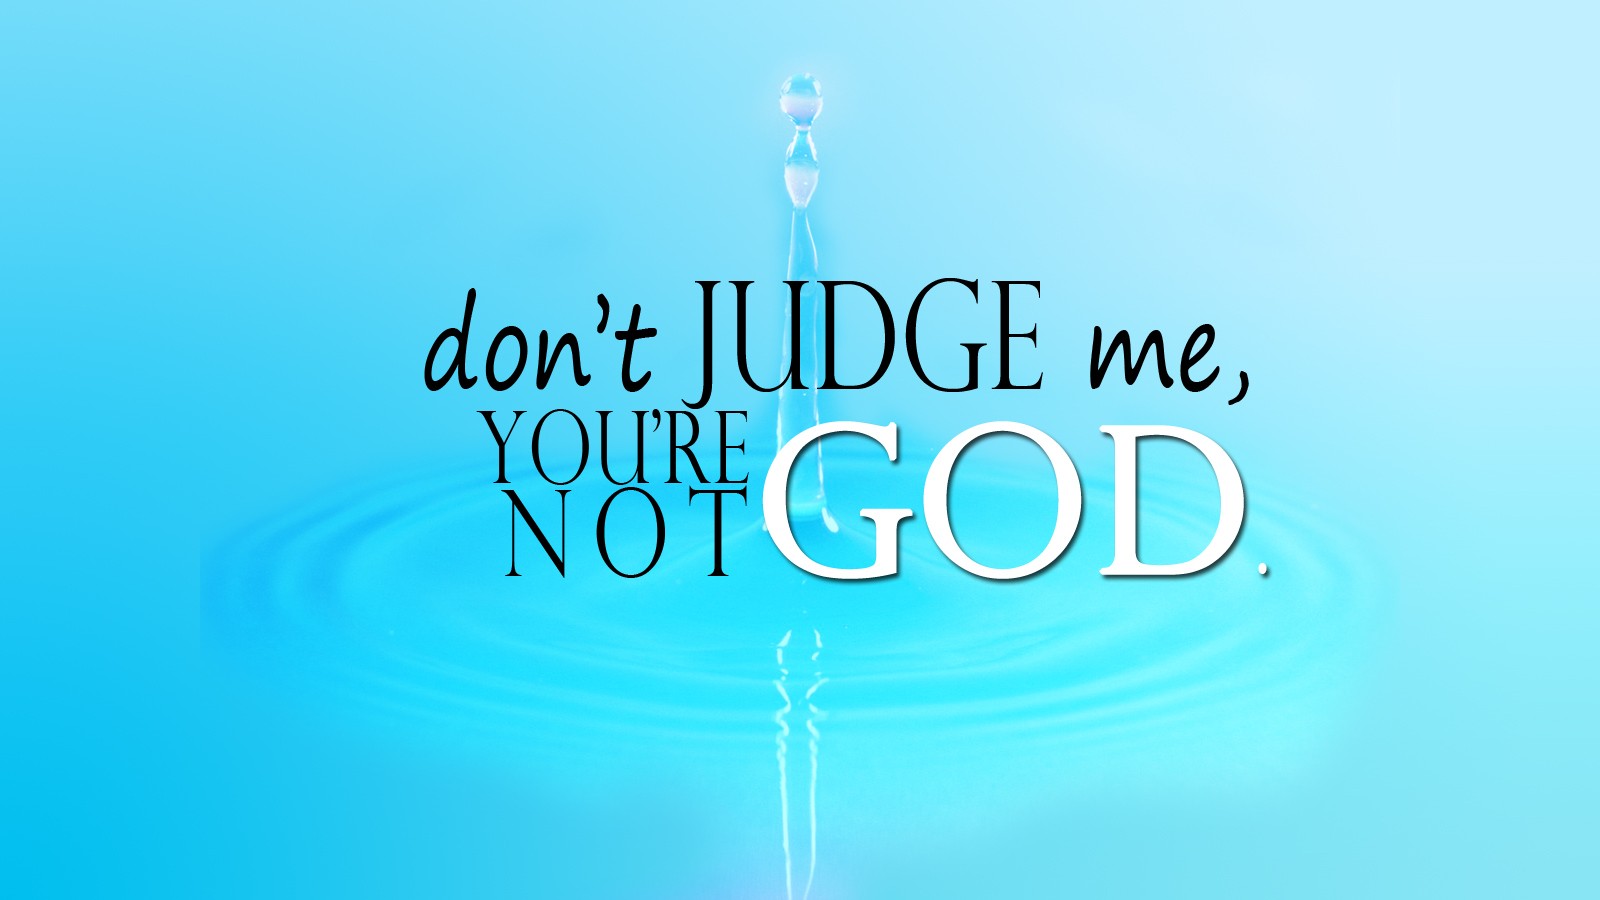 Quotes about Judging religion (23 quotes)